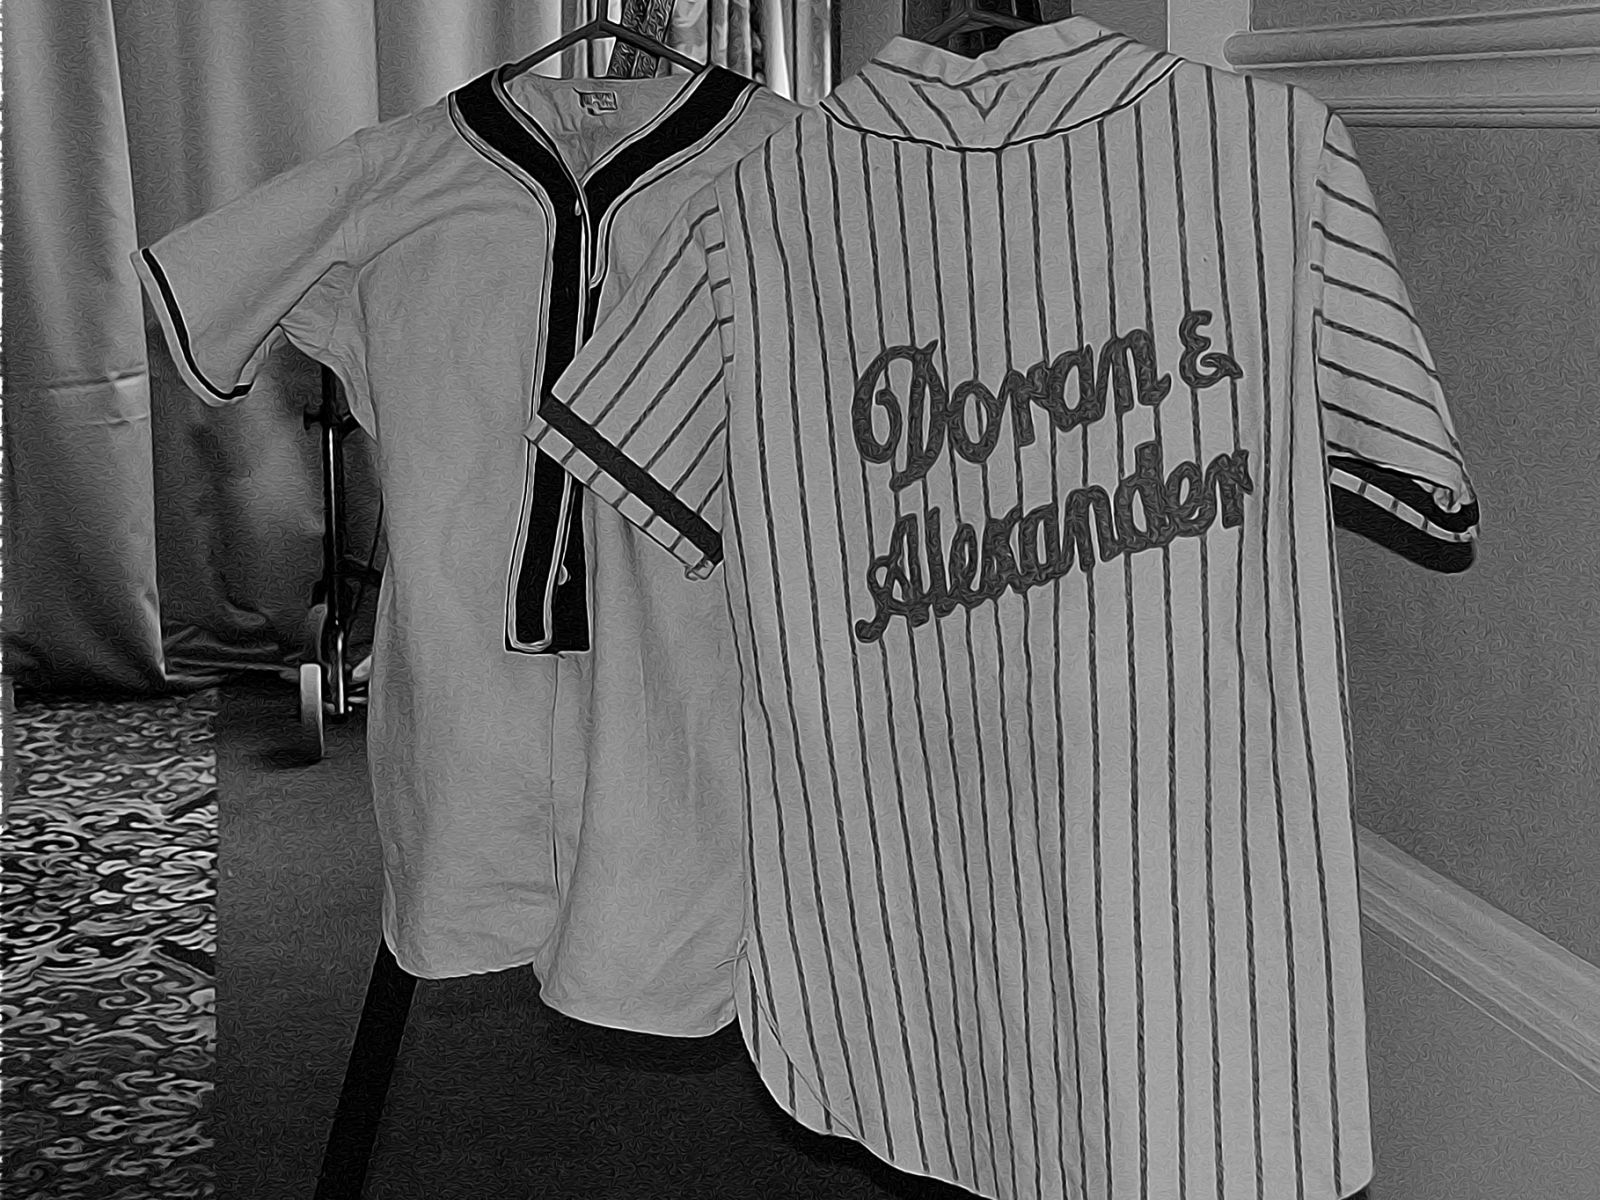 two old baseball shirts in black and white